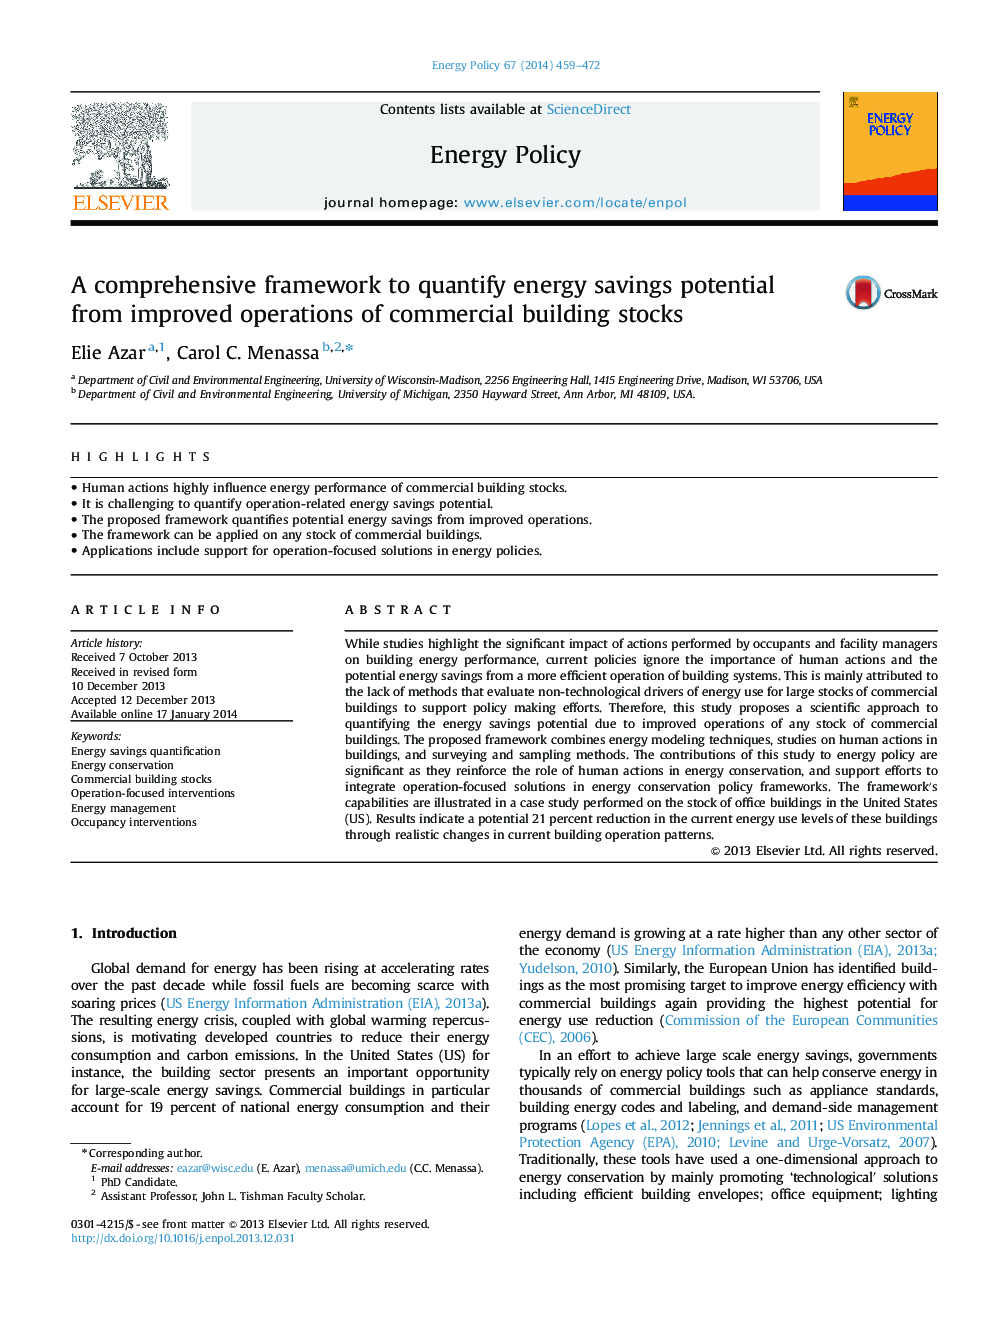 A comprehensive framework to quantify energy savings potential from improved operations of commercial building stocks